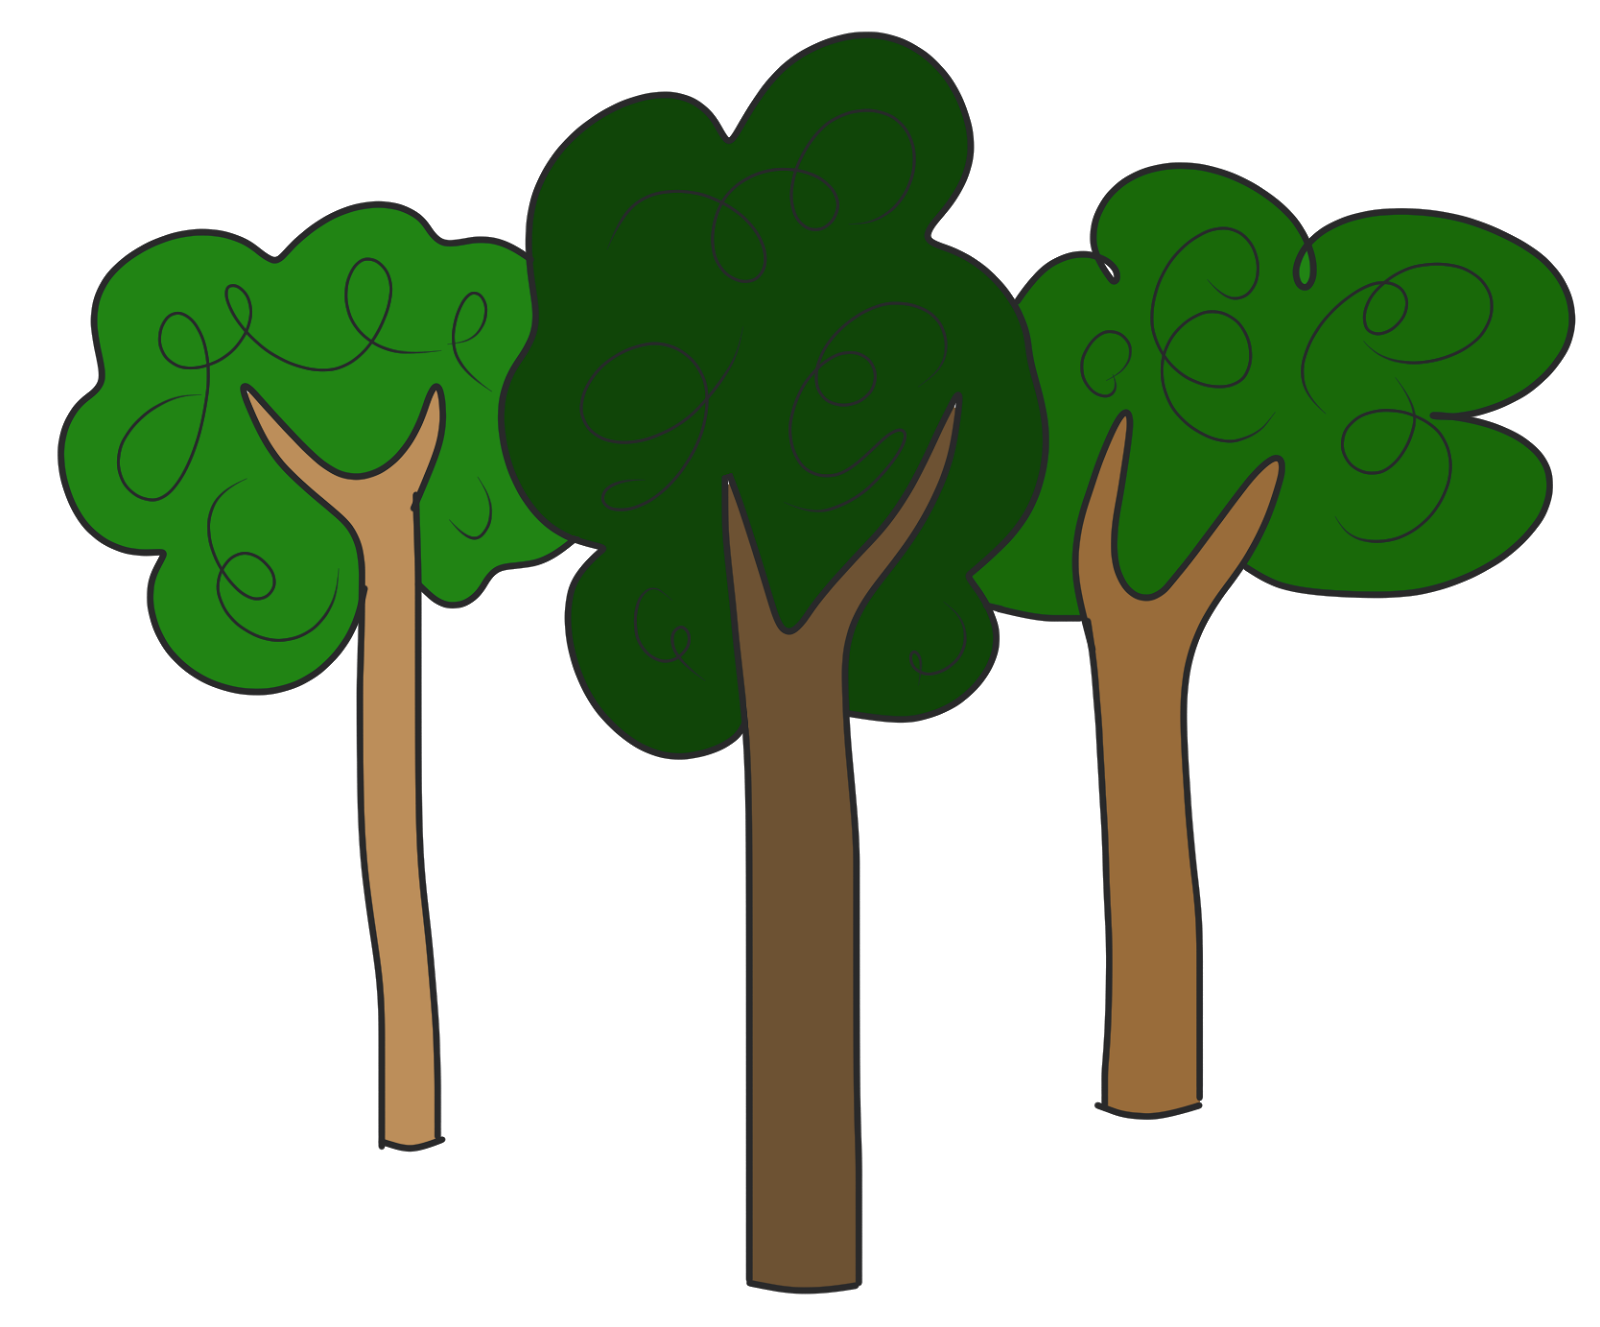 ... Clip art for trees ... - Clipart Of Trees